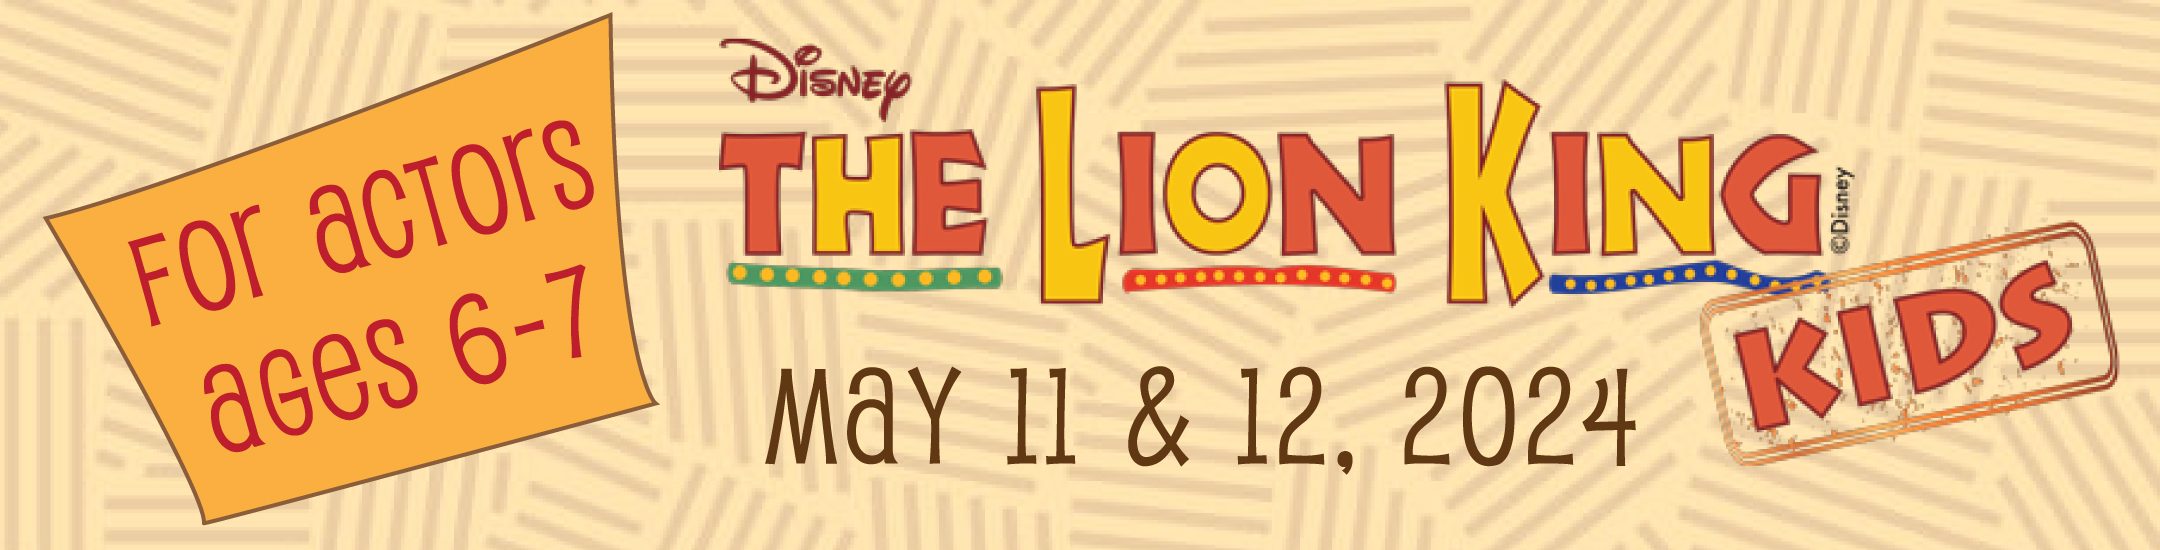 SHOWS_LionKing_Spring2024